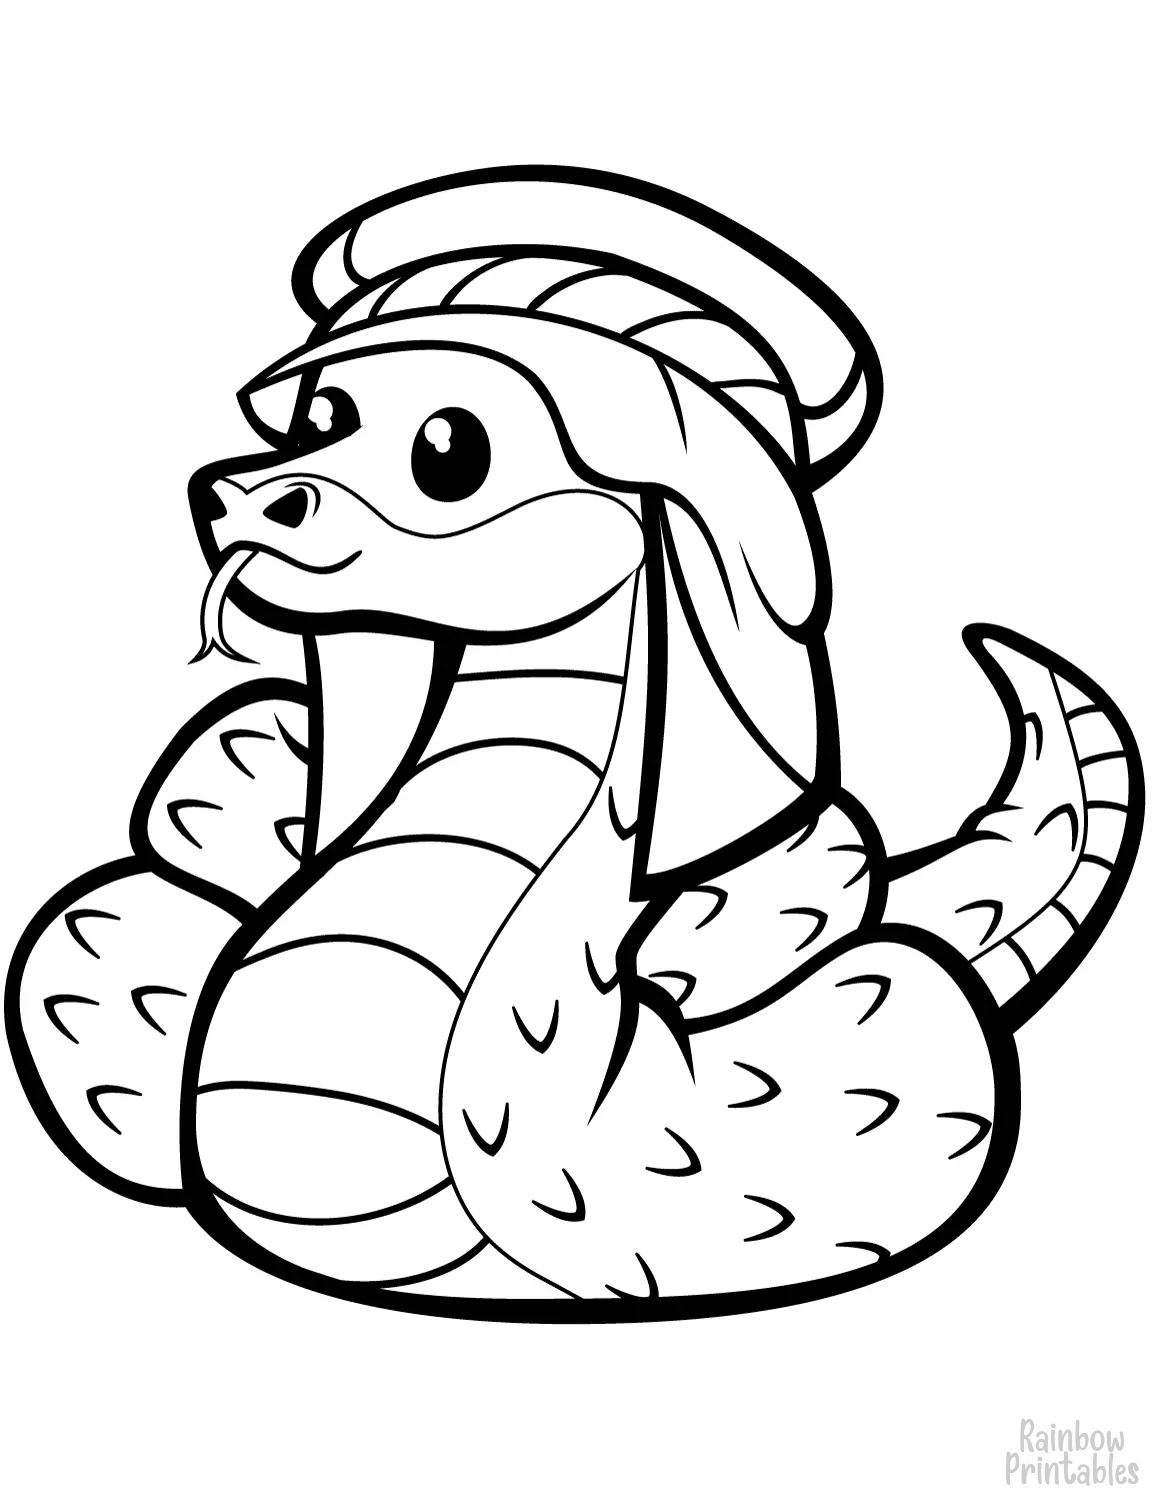 Desert-cute-snake-in-kufia-coloring-page-for-kids